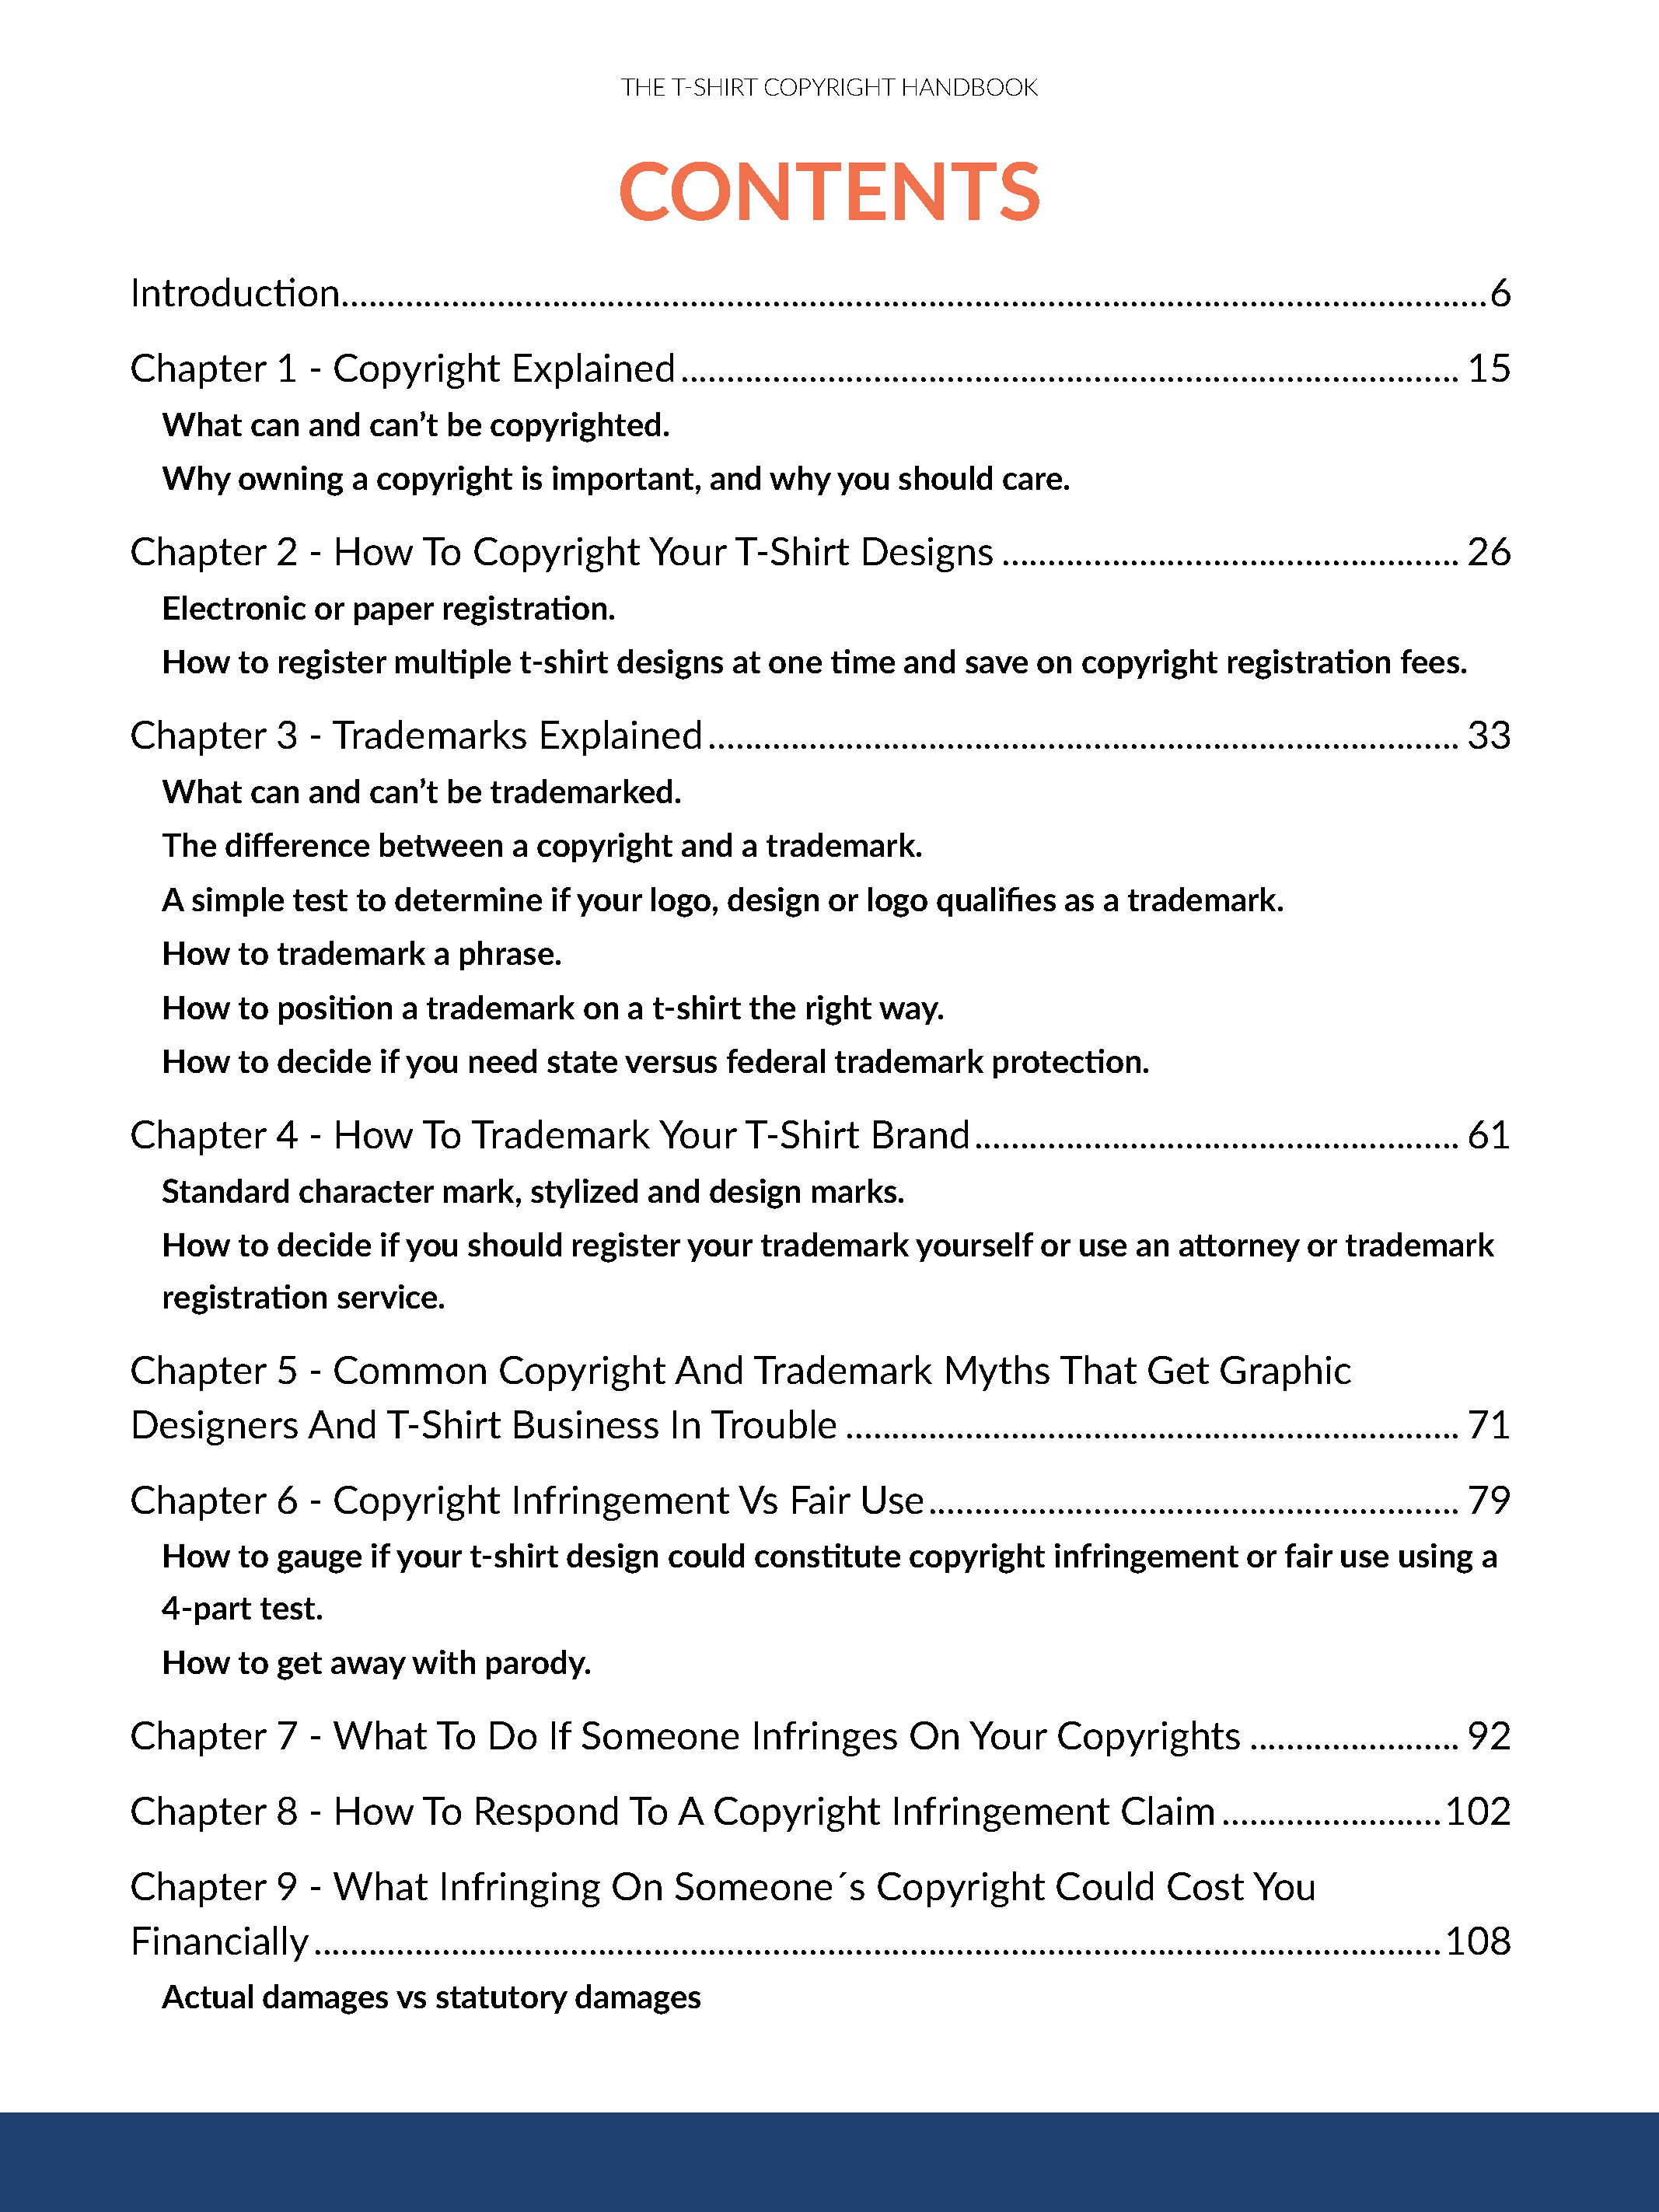 The T-Shirt Copyright Handbook Table of Contents